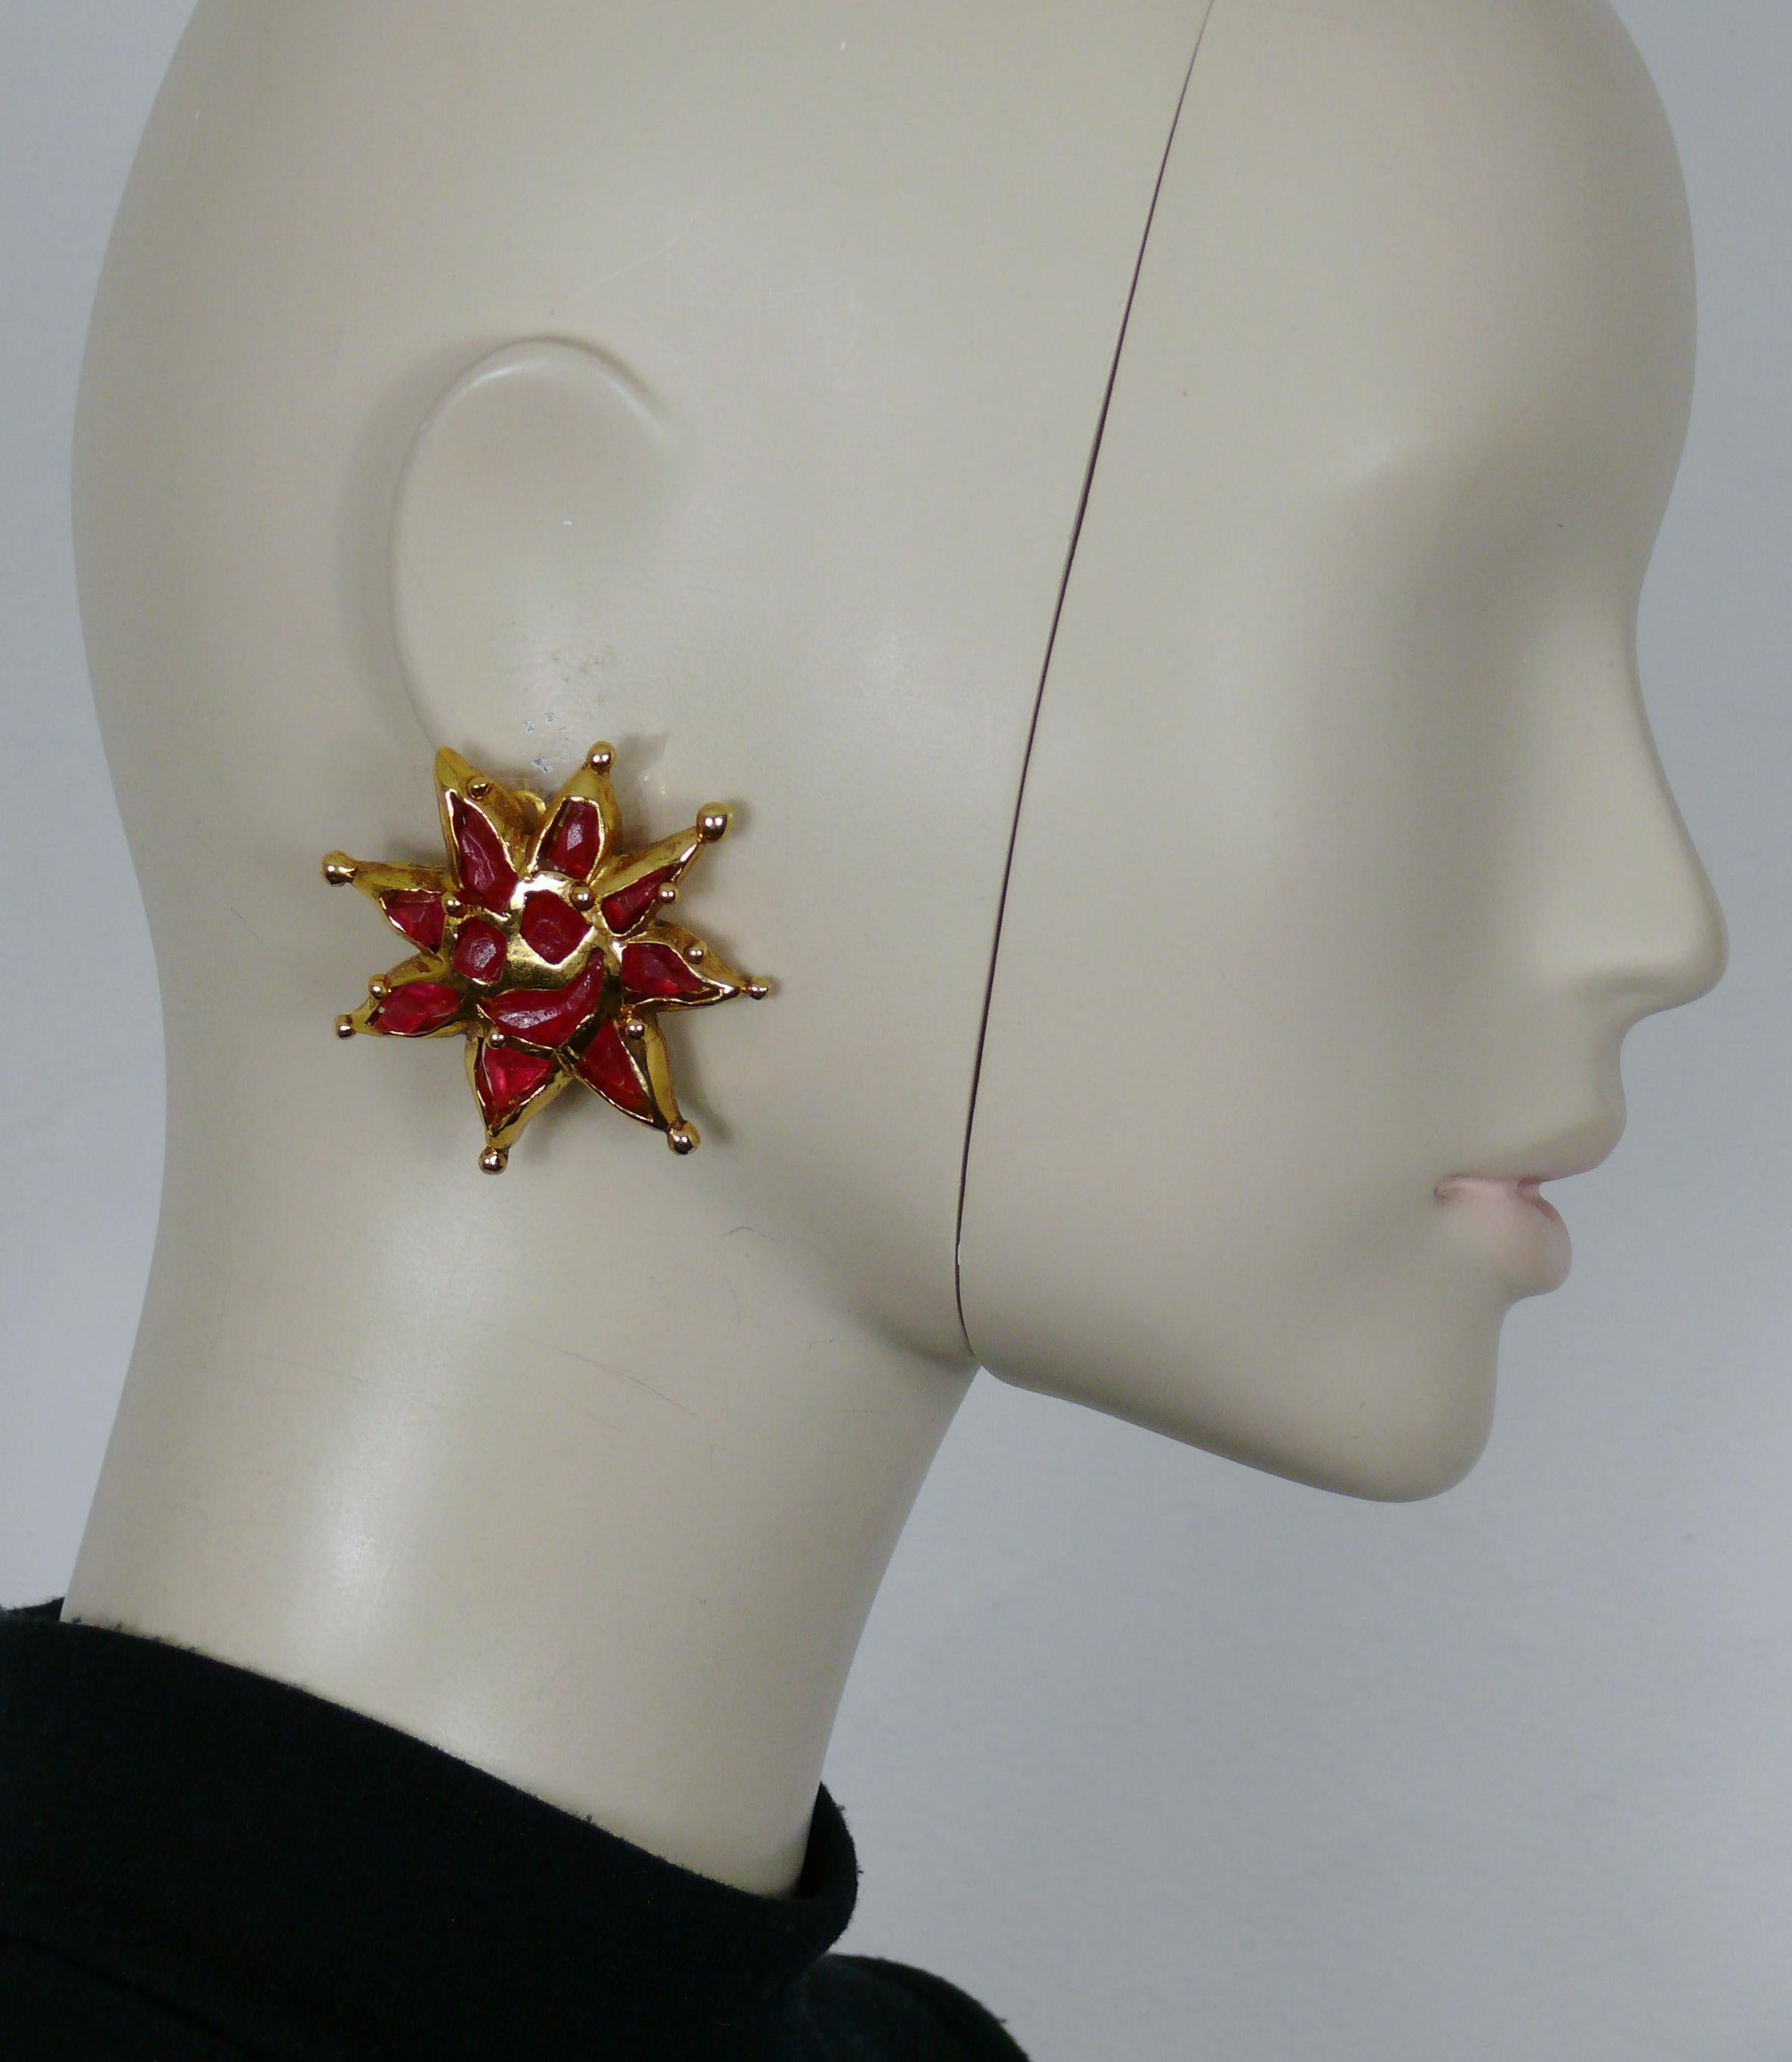 CHRISTIAN LACROIX vintage gold tone sun face clip-on earrings embellished with irregular shaped red resin cabochons.

Marked CHRISTIAN LACROIX CL Made in France.

Indicative measurements : max. height approx. 5.5 cm (2.17 inches) / max. width approx